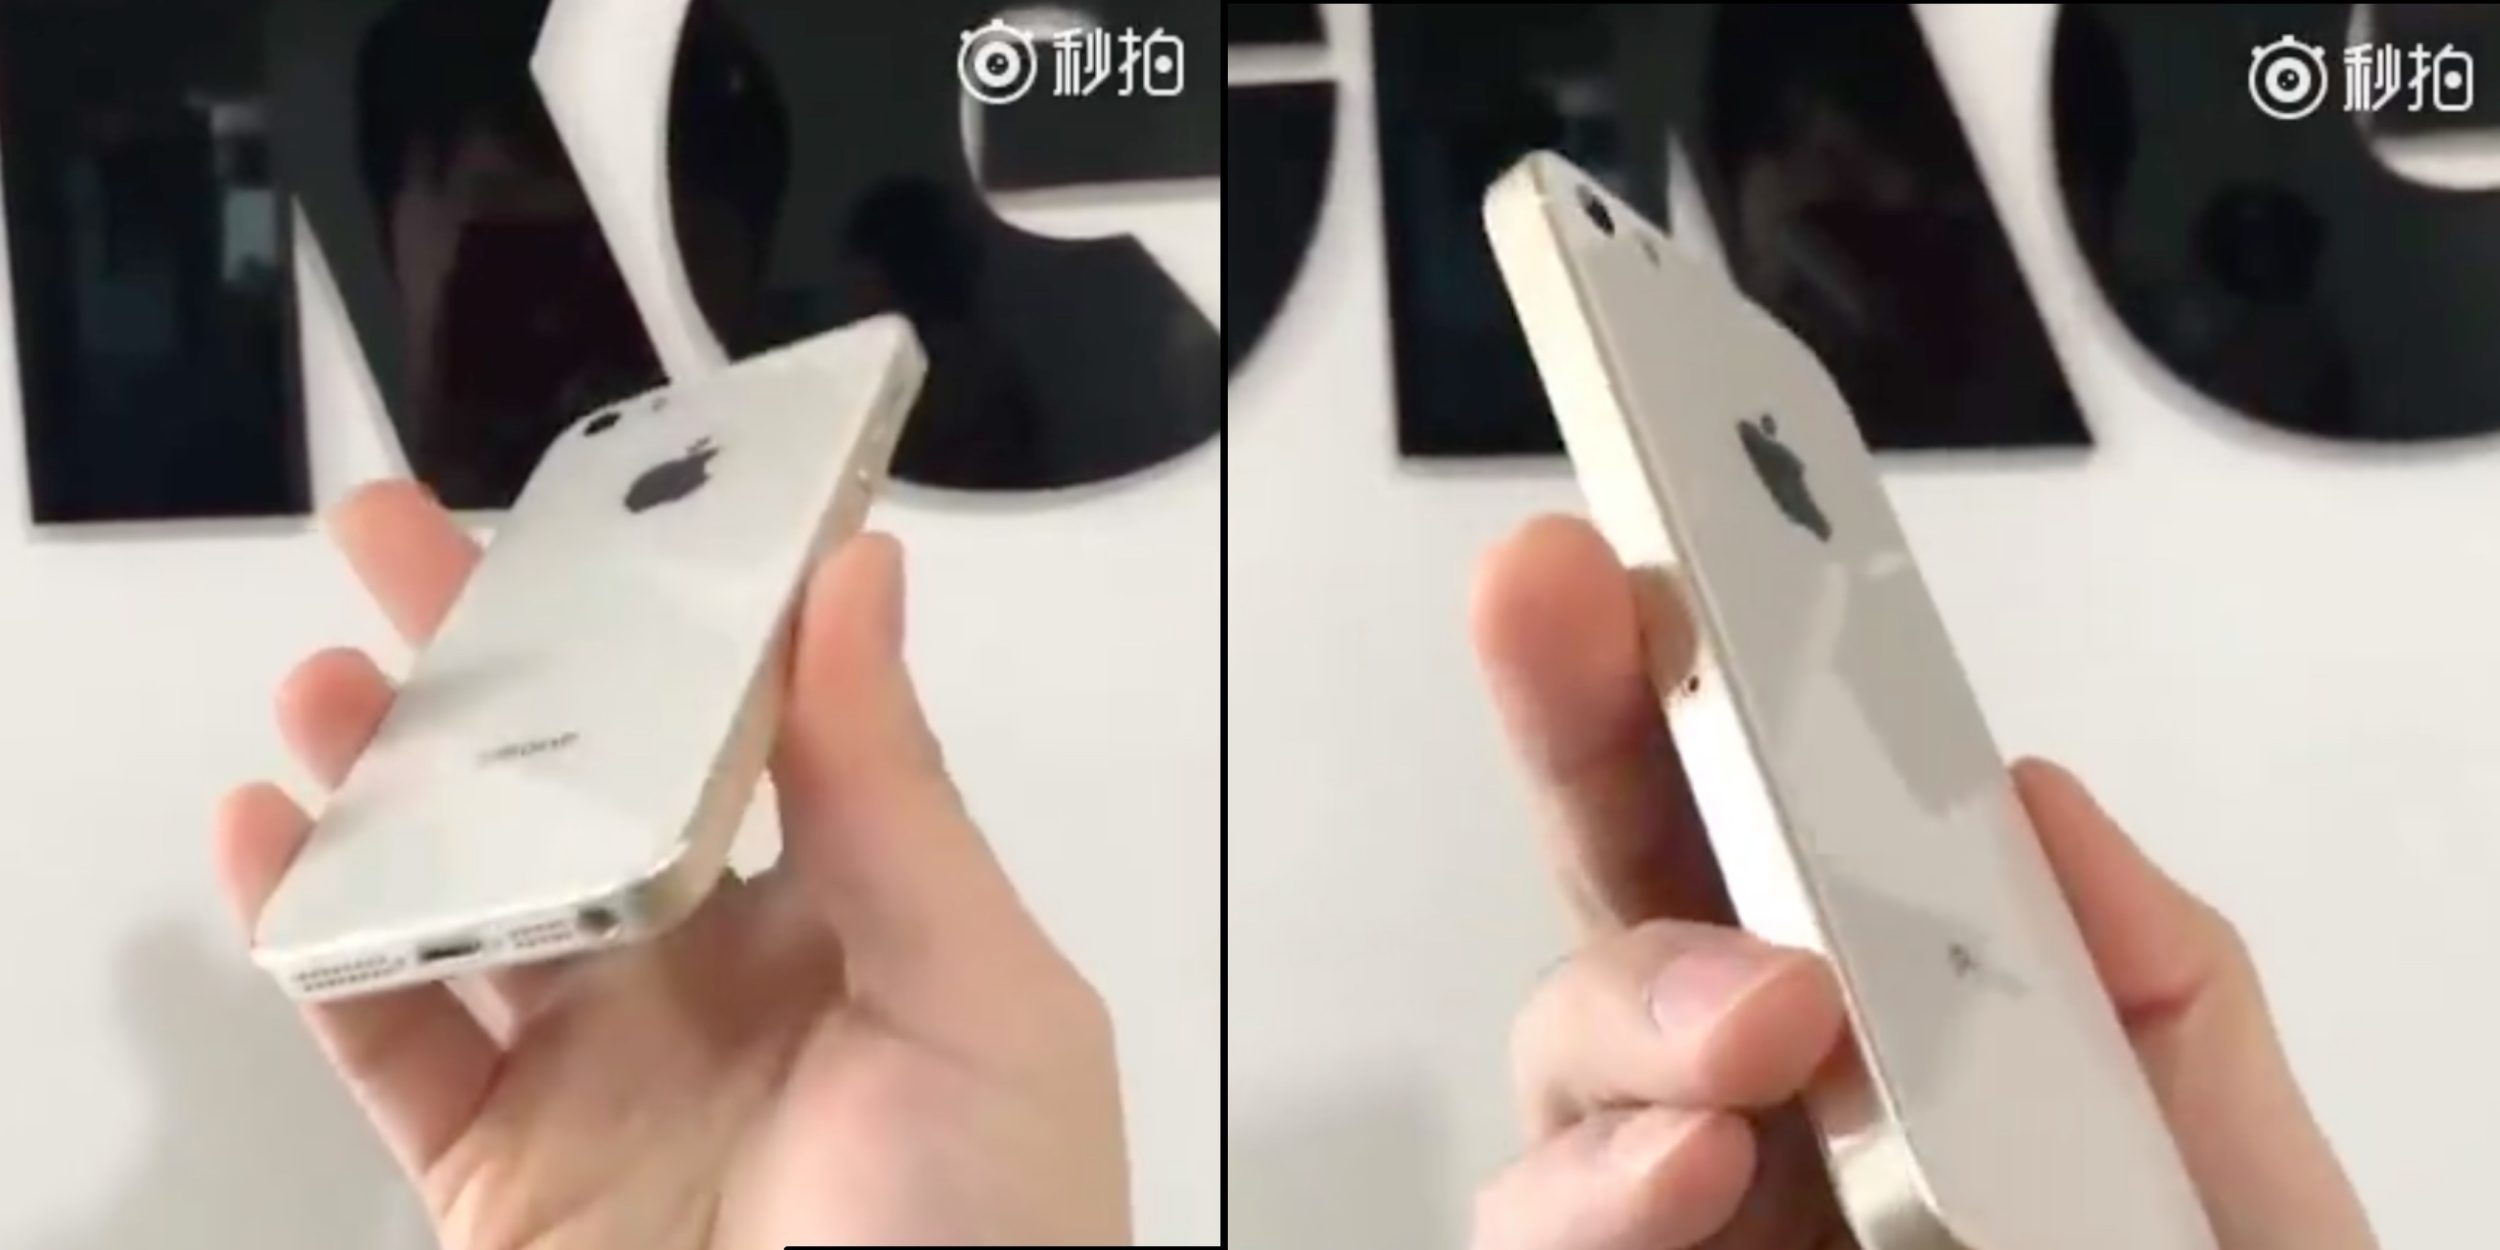 Photos Claim to Show iPhone SE 2 with Glass Back for Wireless Charging, Headphone Jack Remains